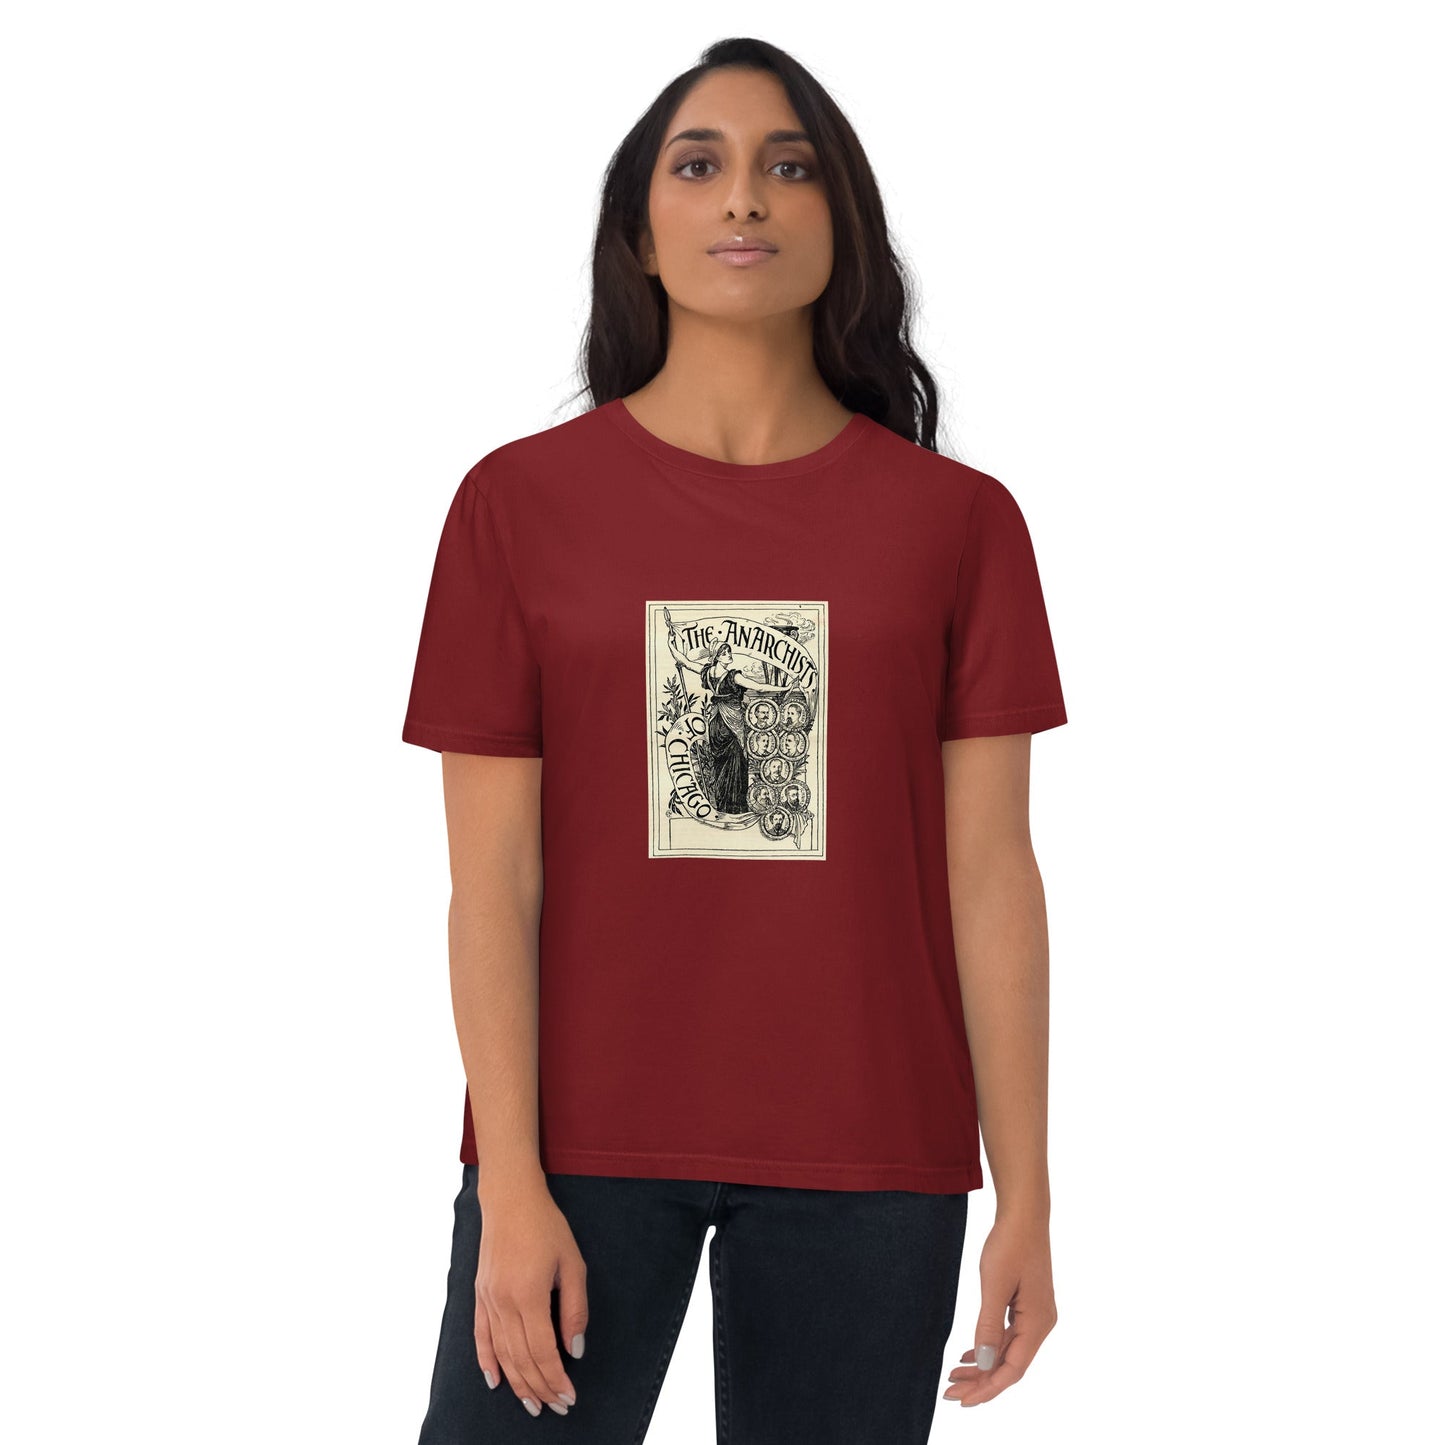 The Anarchists - Unisex organic cotton t-shirt - Souled Out World